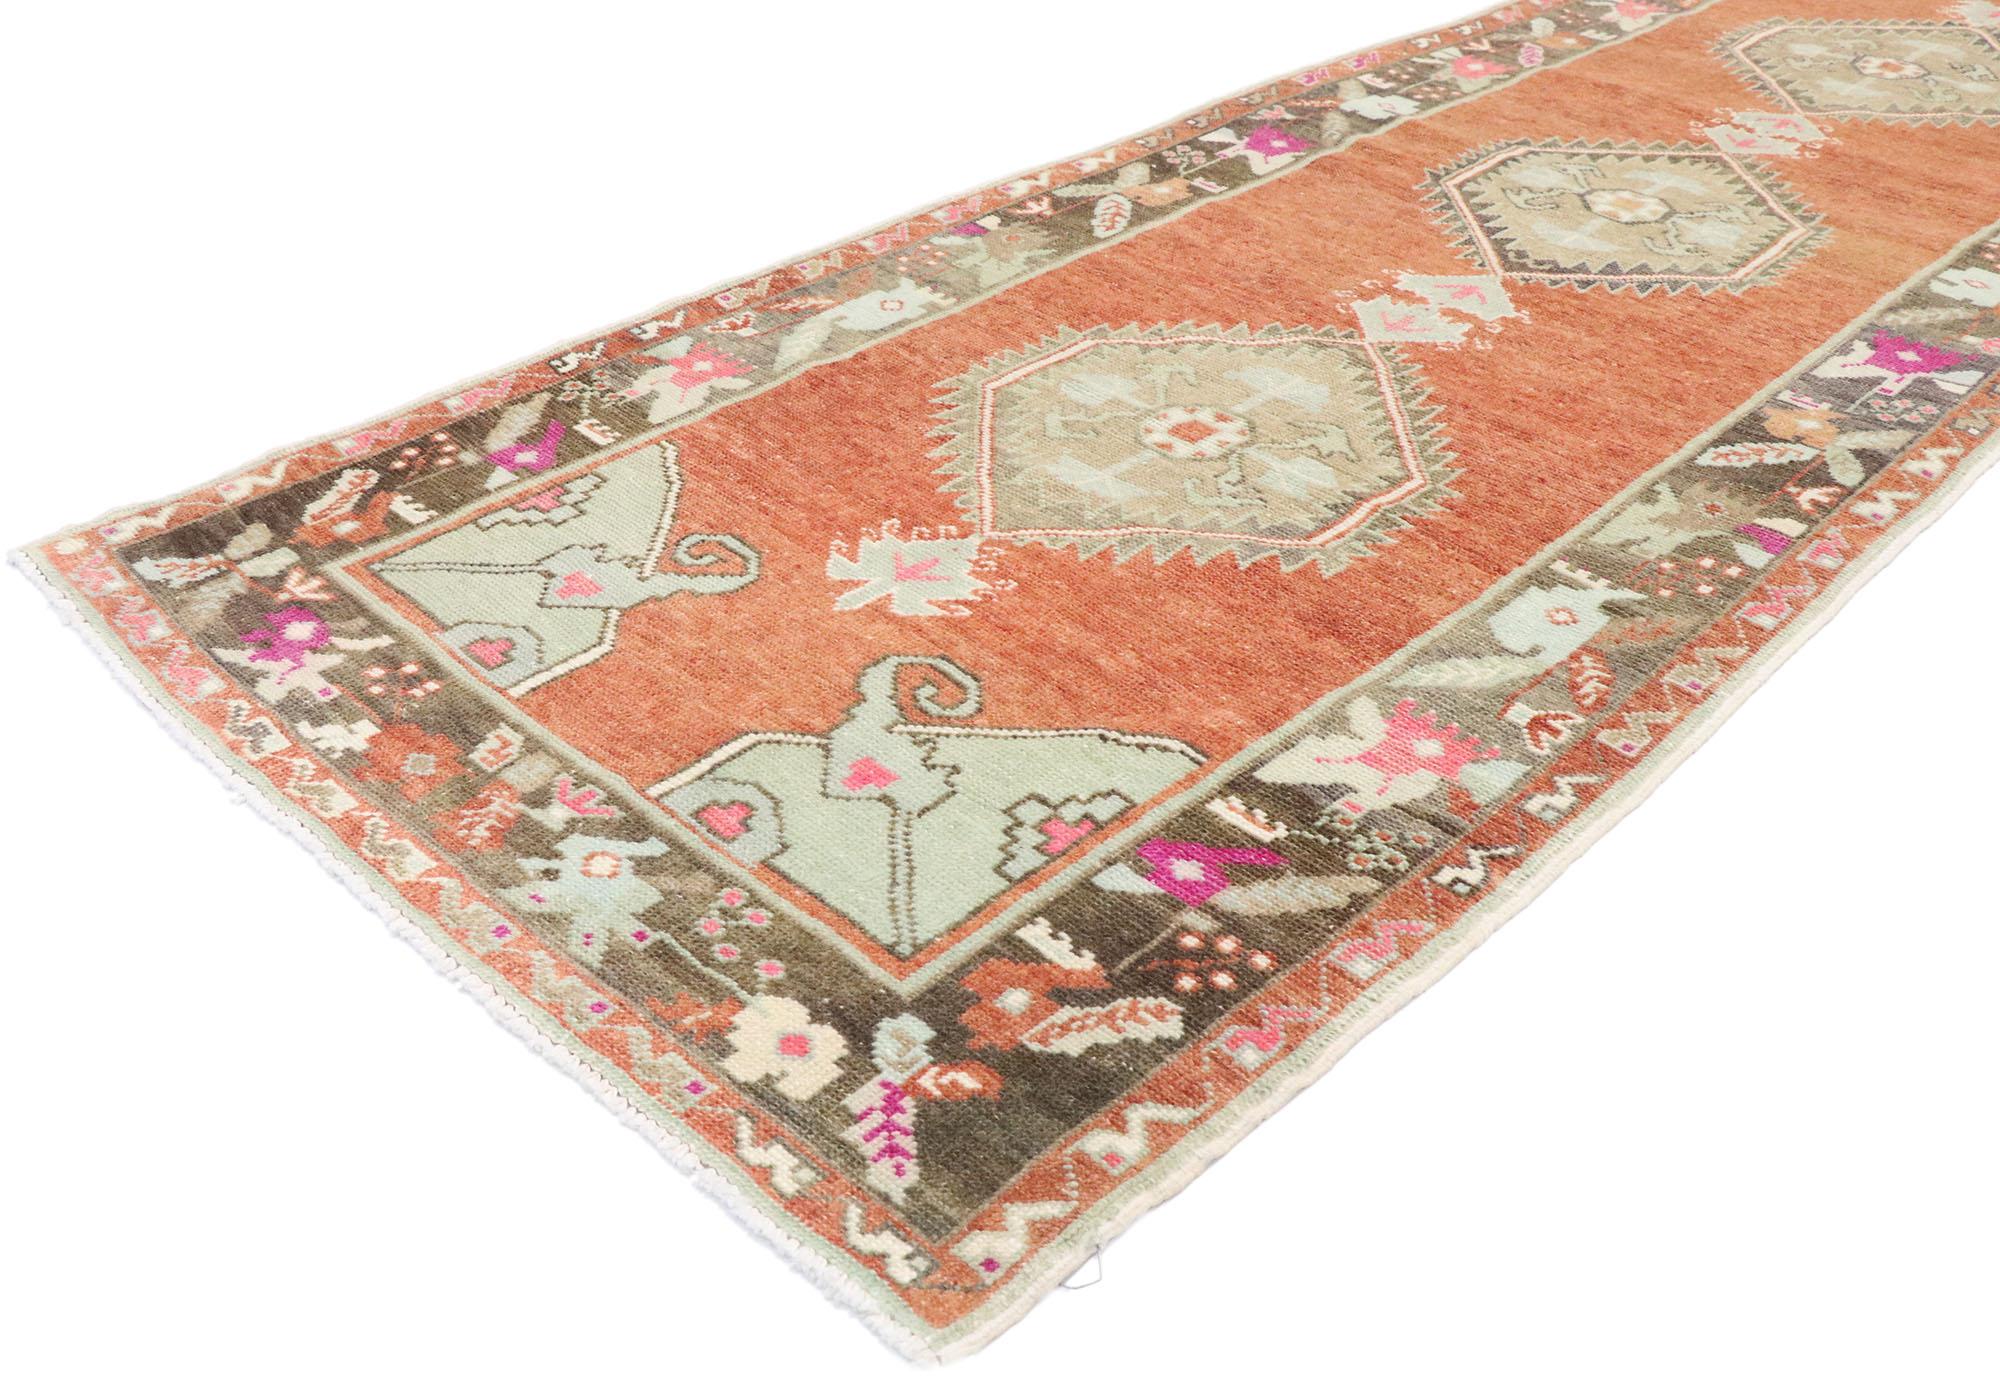 53474, vintage Turkish Oushak Runner with Rustic English Cottage style. With a timeless design and a hint of romantic connotations, this hand knotted wool vintage Turkish Oushak runner is poised to impress. The rustic reddish hued field features